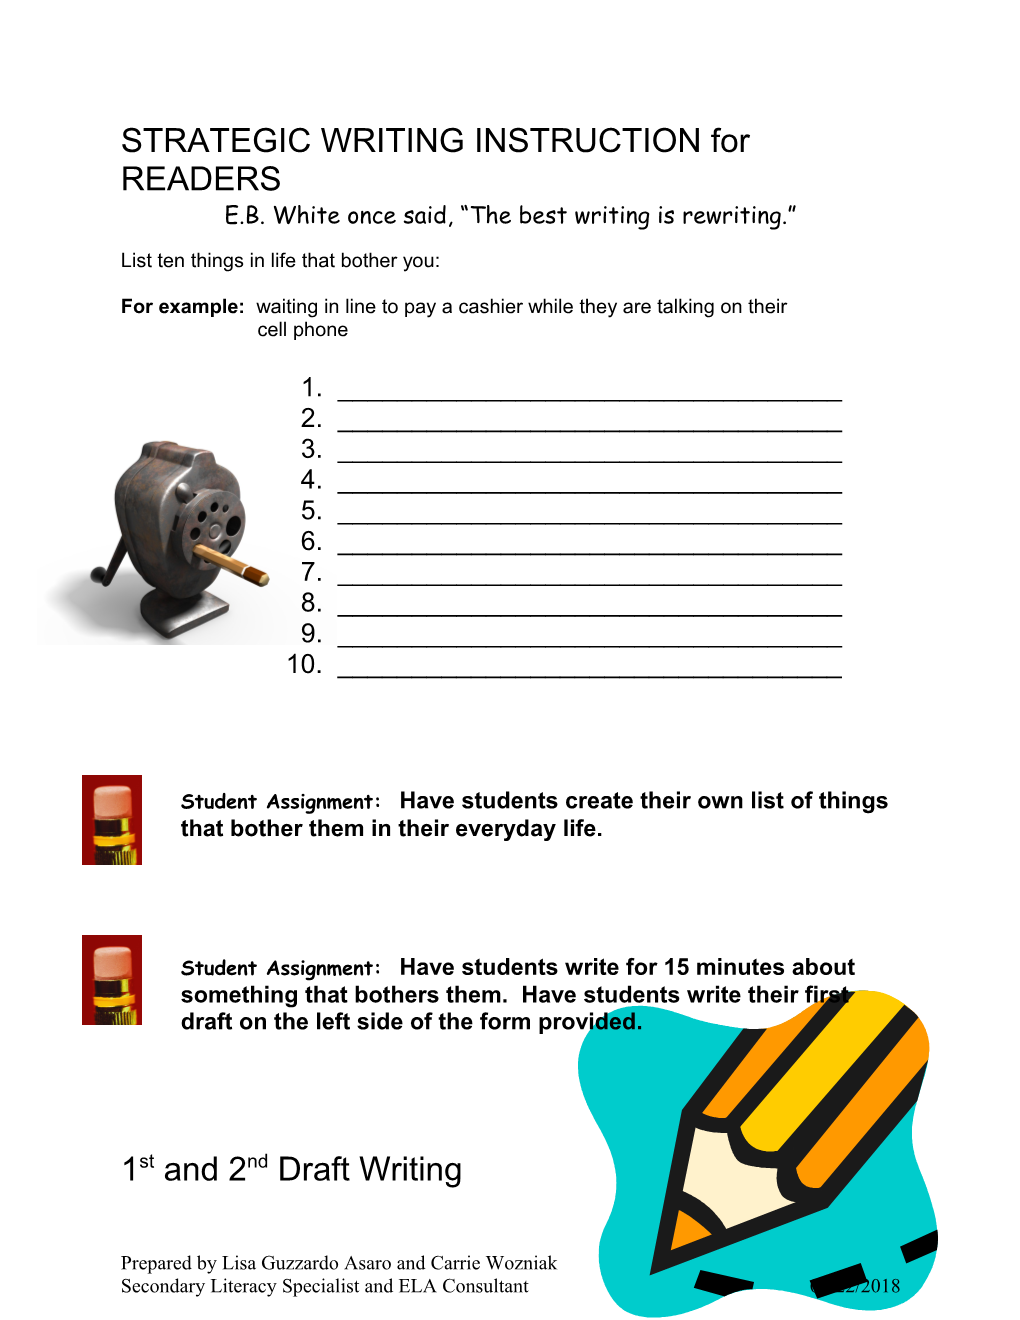 STRATEGIC WRITING INSTRUCTION for READERS